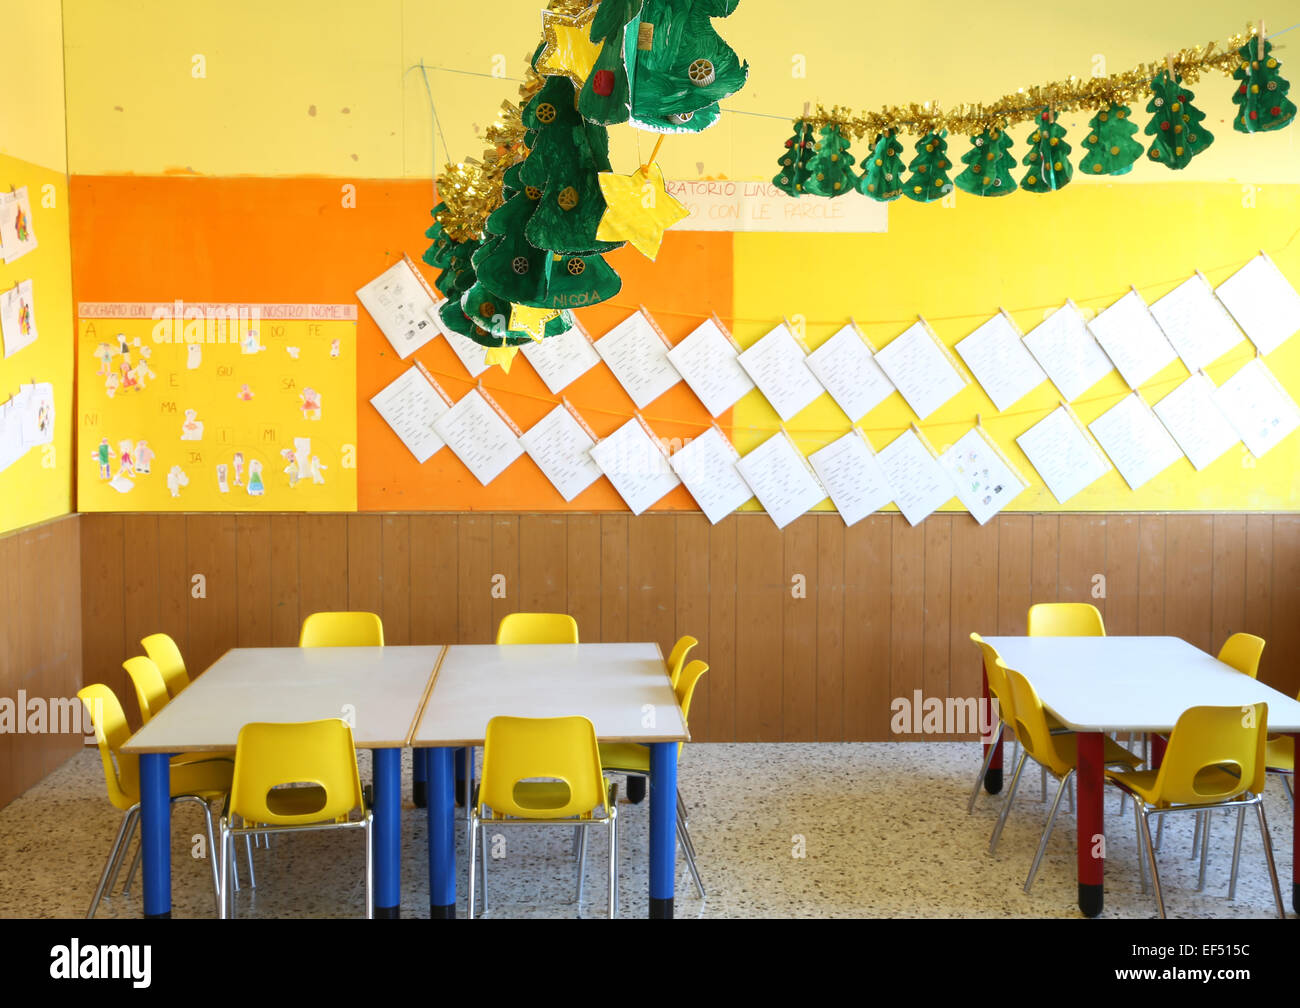 Kindergarten Classroom With Yellow Chairs And Table With